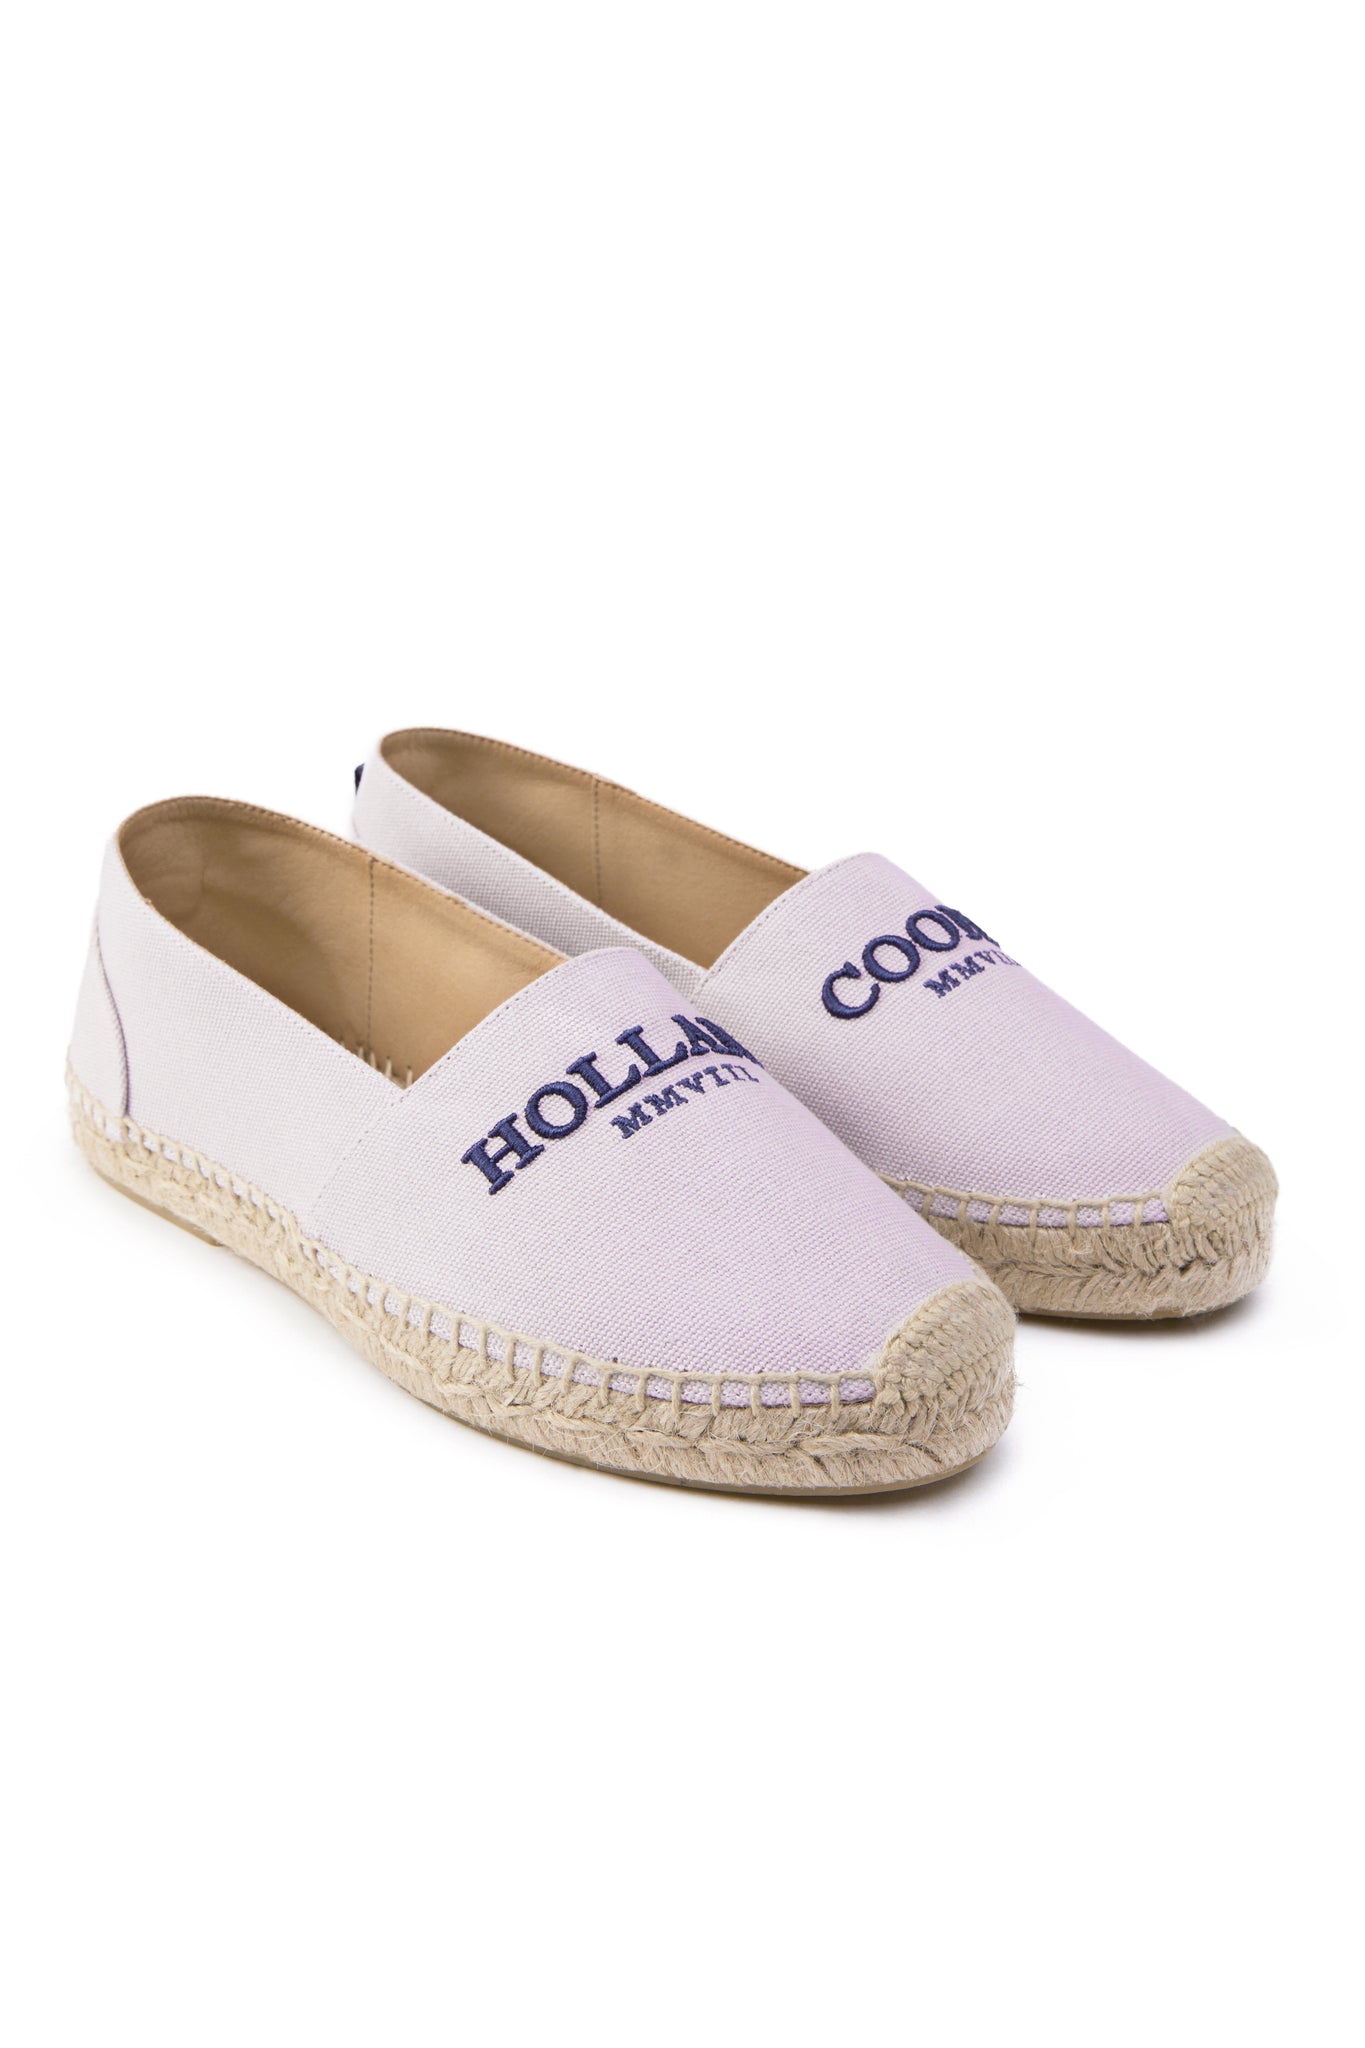 classic style light pink canvas espadrille with plaited jute sole and jute toe cap with navy embroidered branding on top